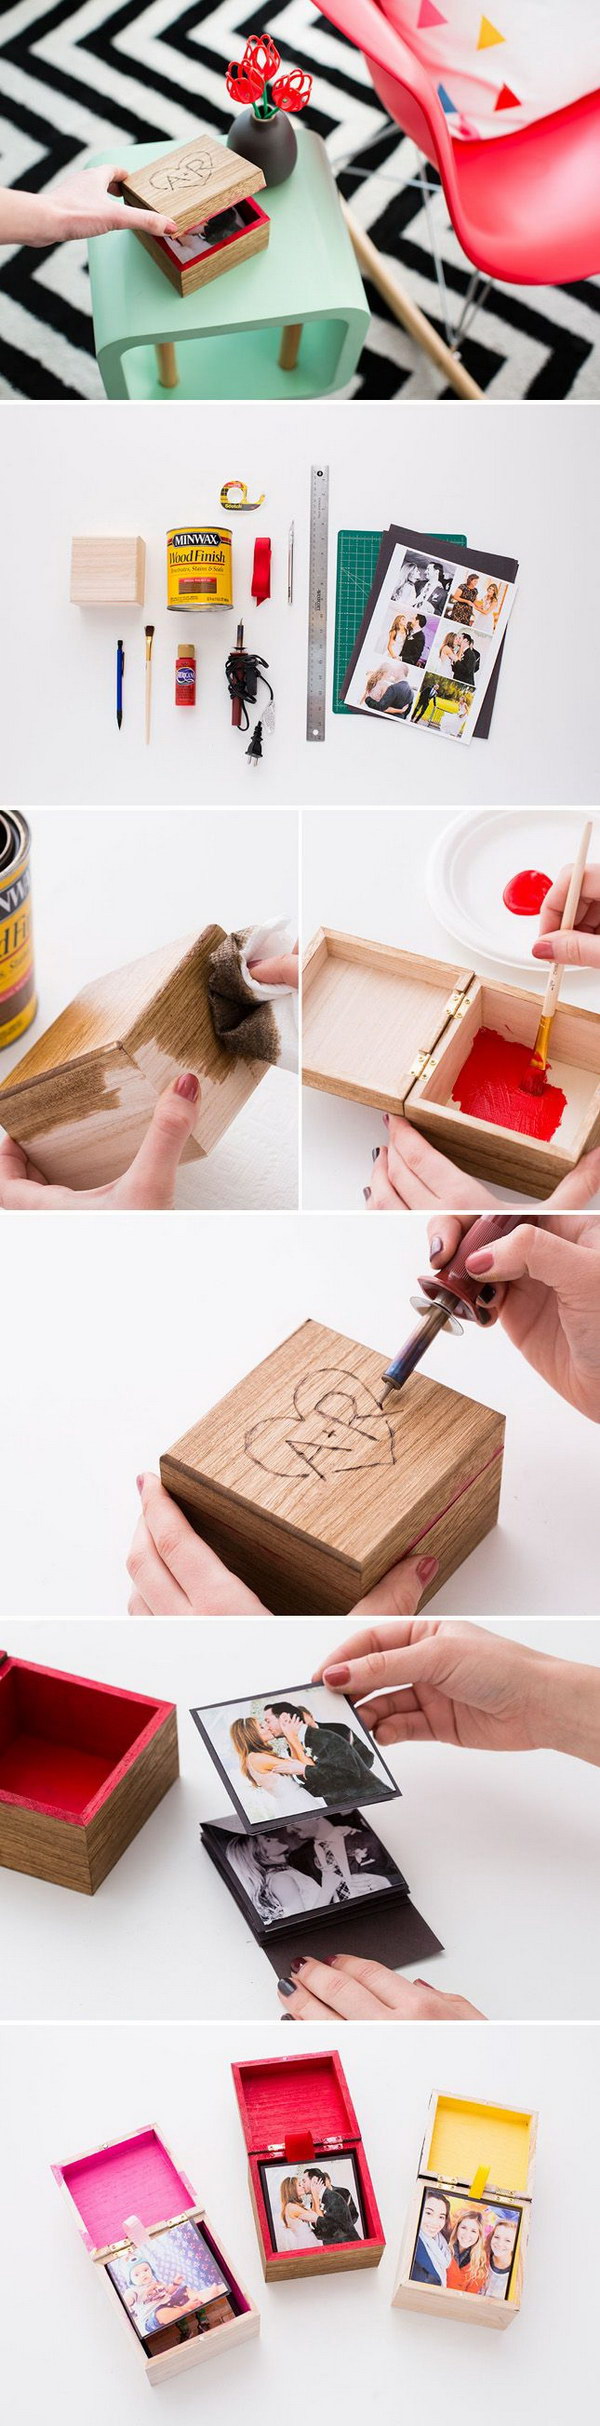 DIY Personalized Gifts for Your Loved Ones - Hative